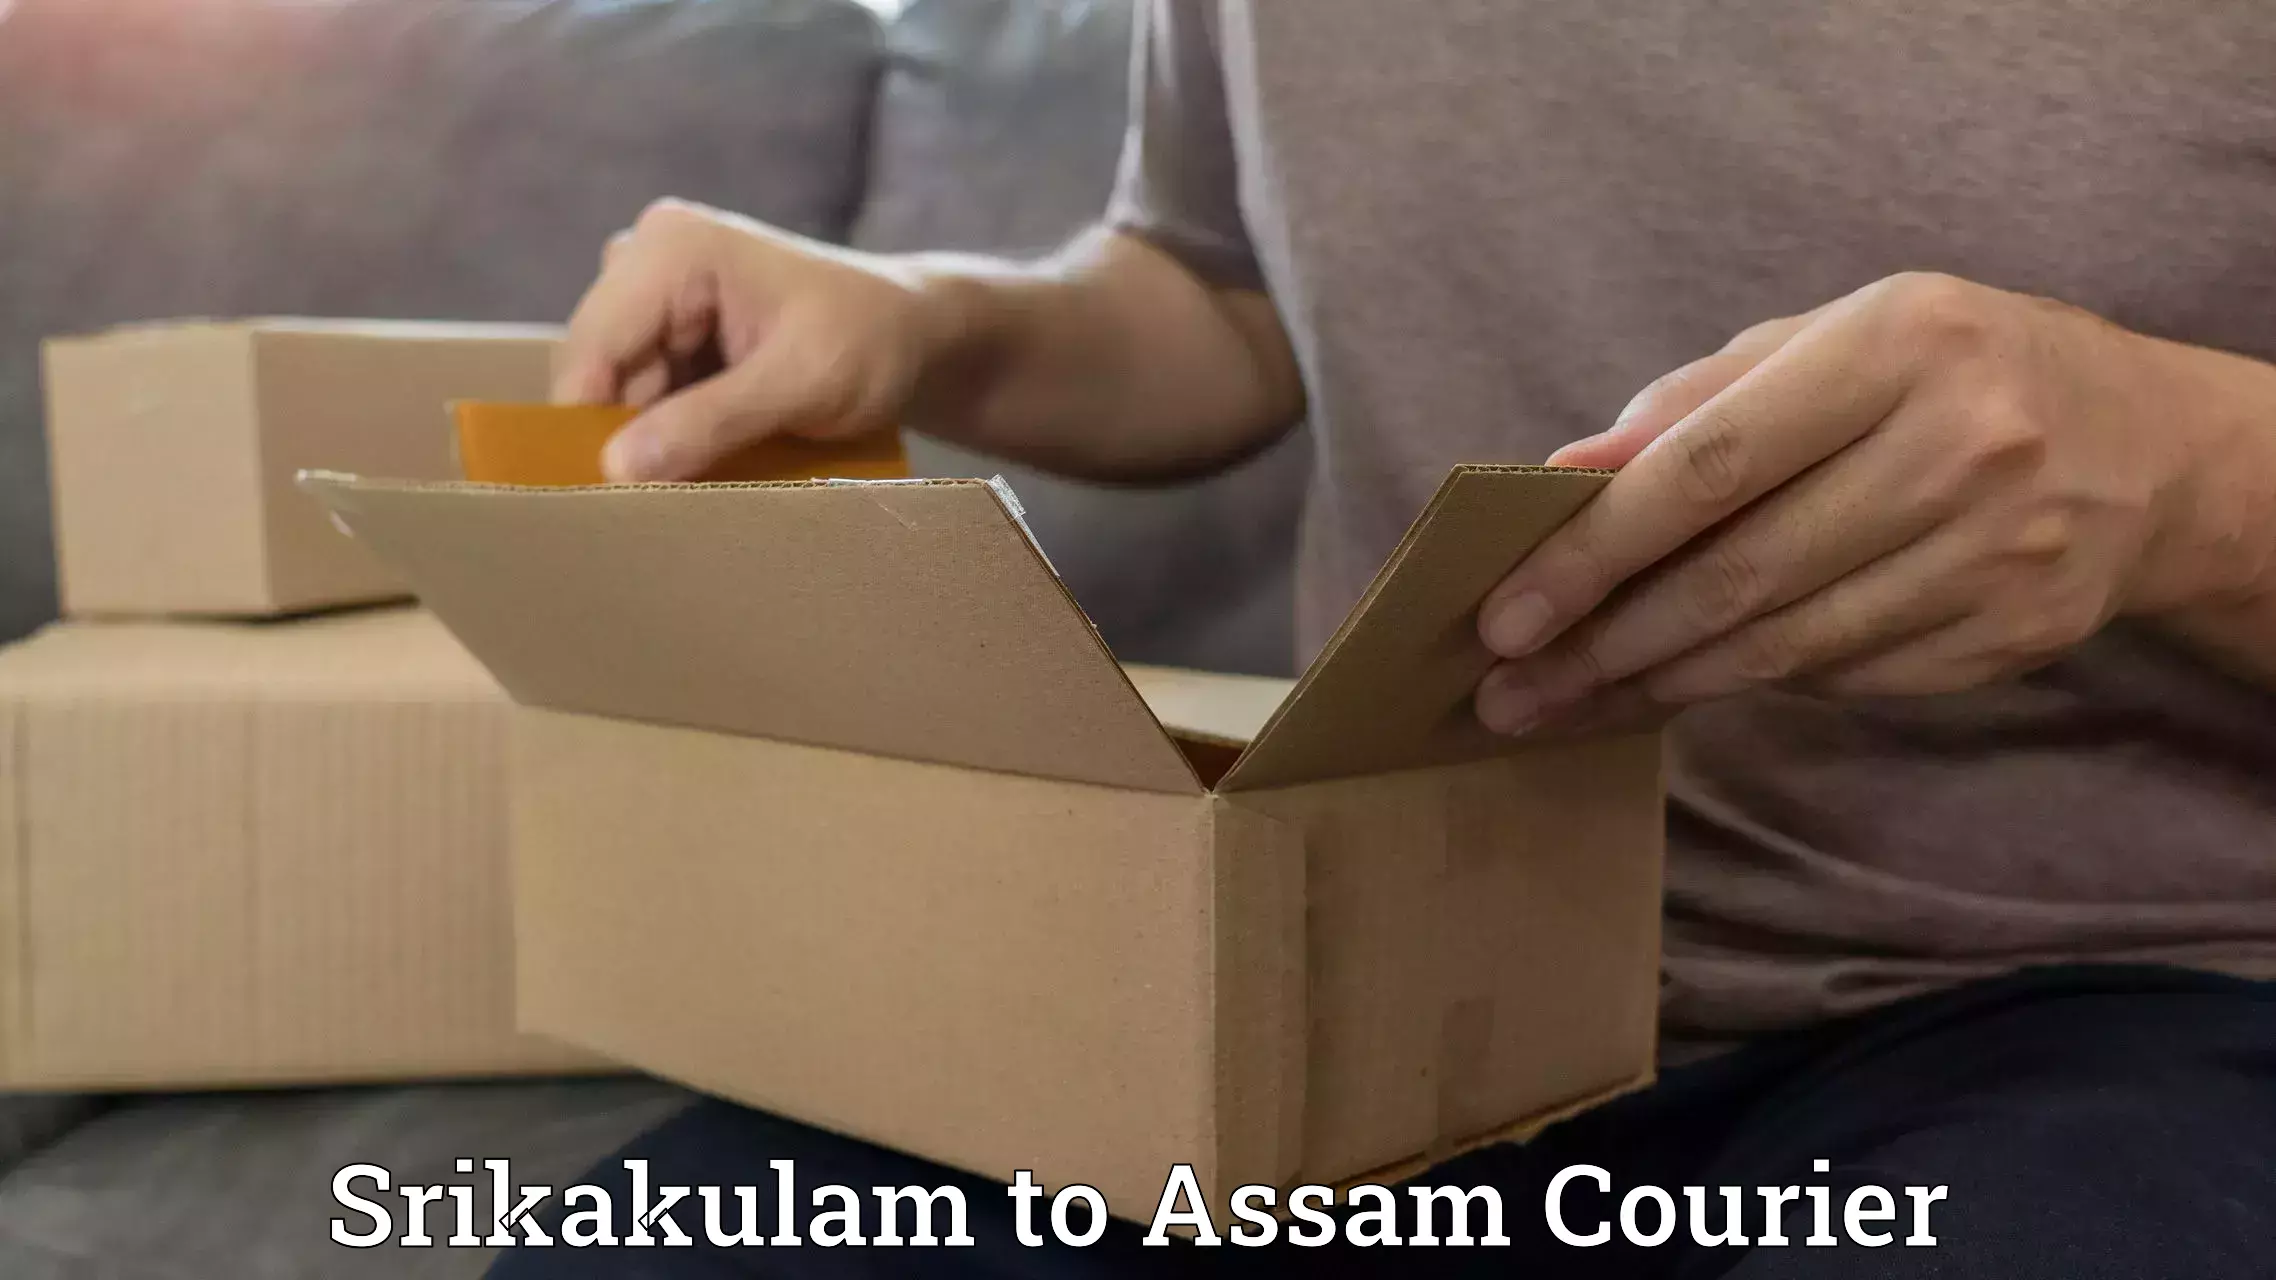 State-of-the-art courier technology in Srikakulam to Lala Assam